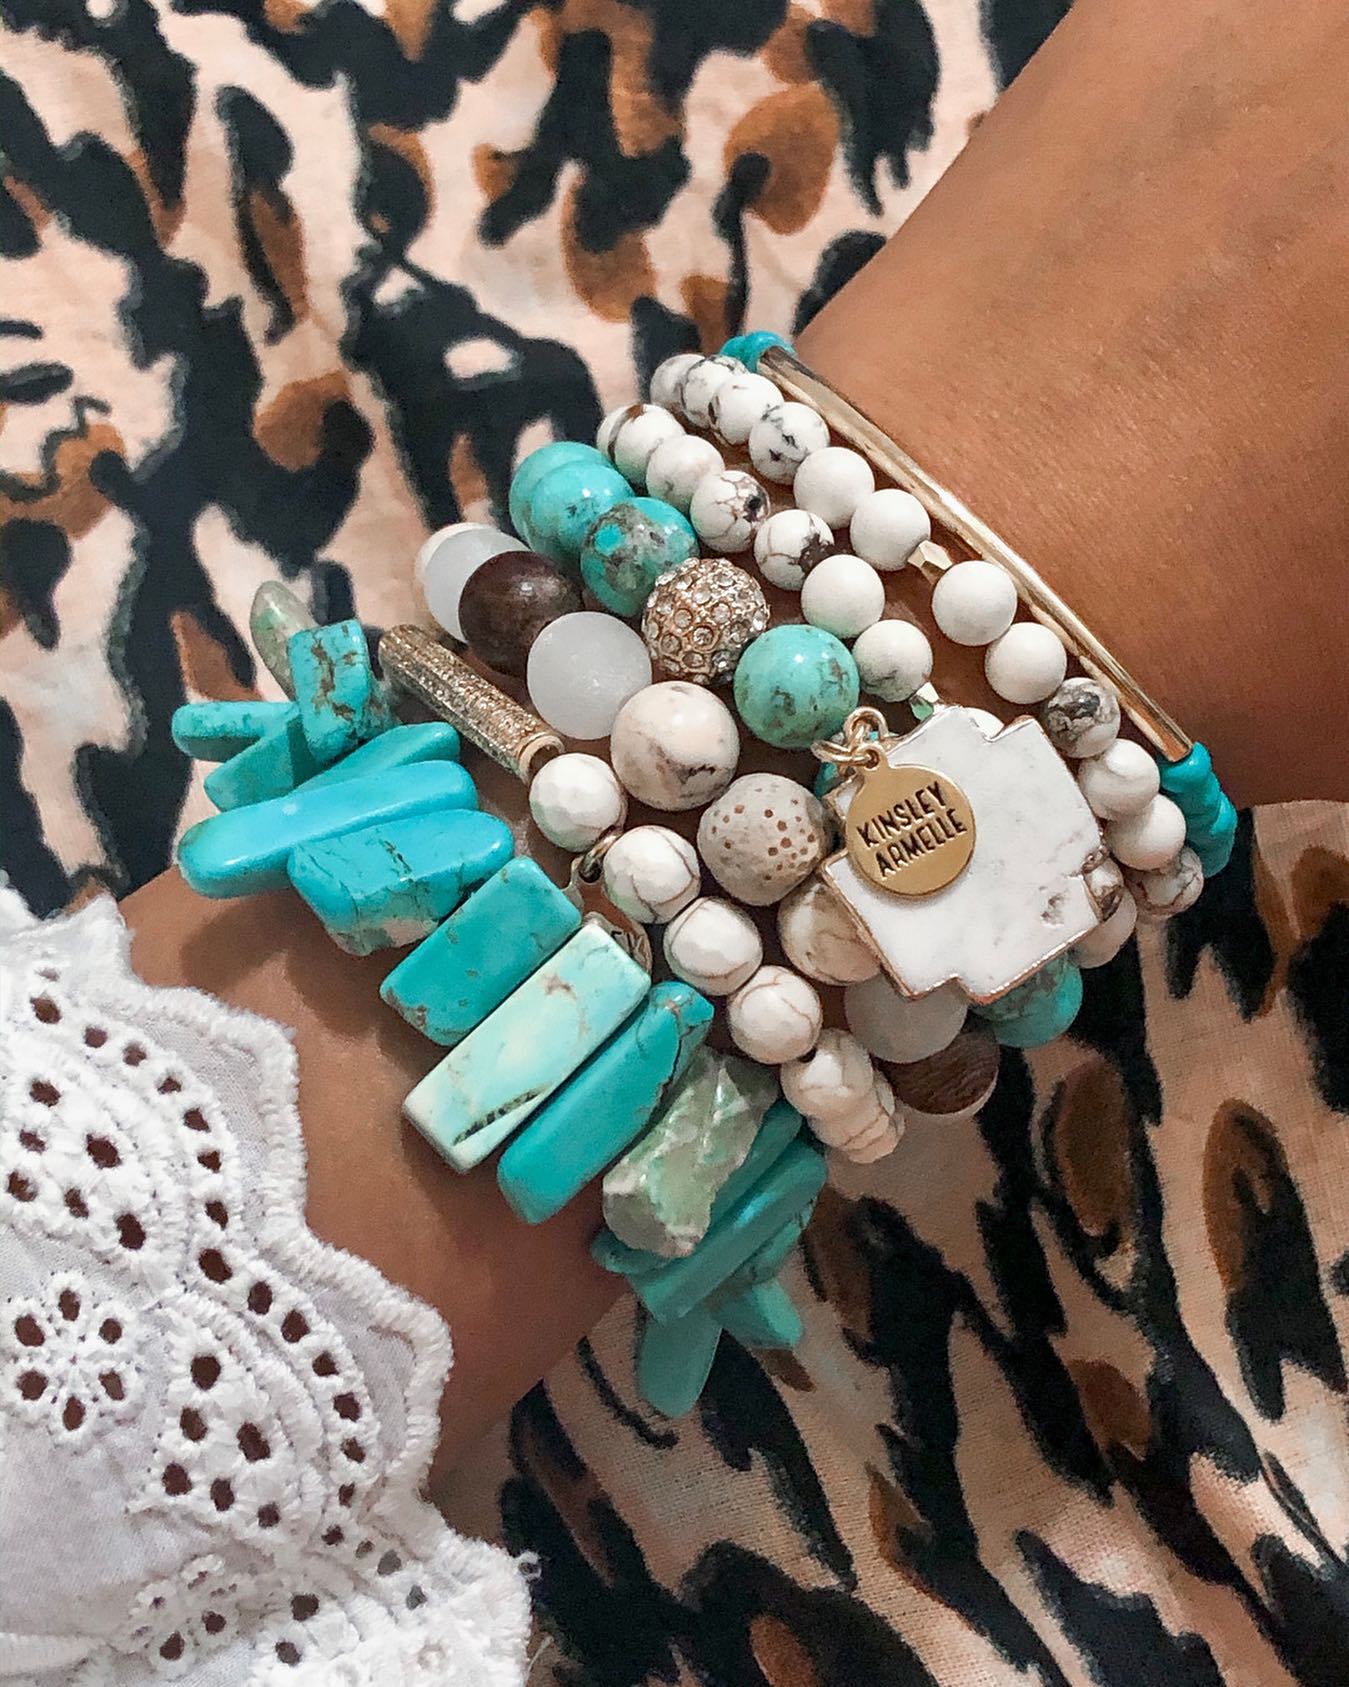 TIFFANY & CO BRACELET STACK - Including Affordable Alternatives from T & Co  